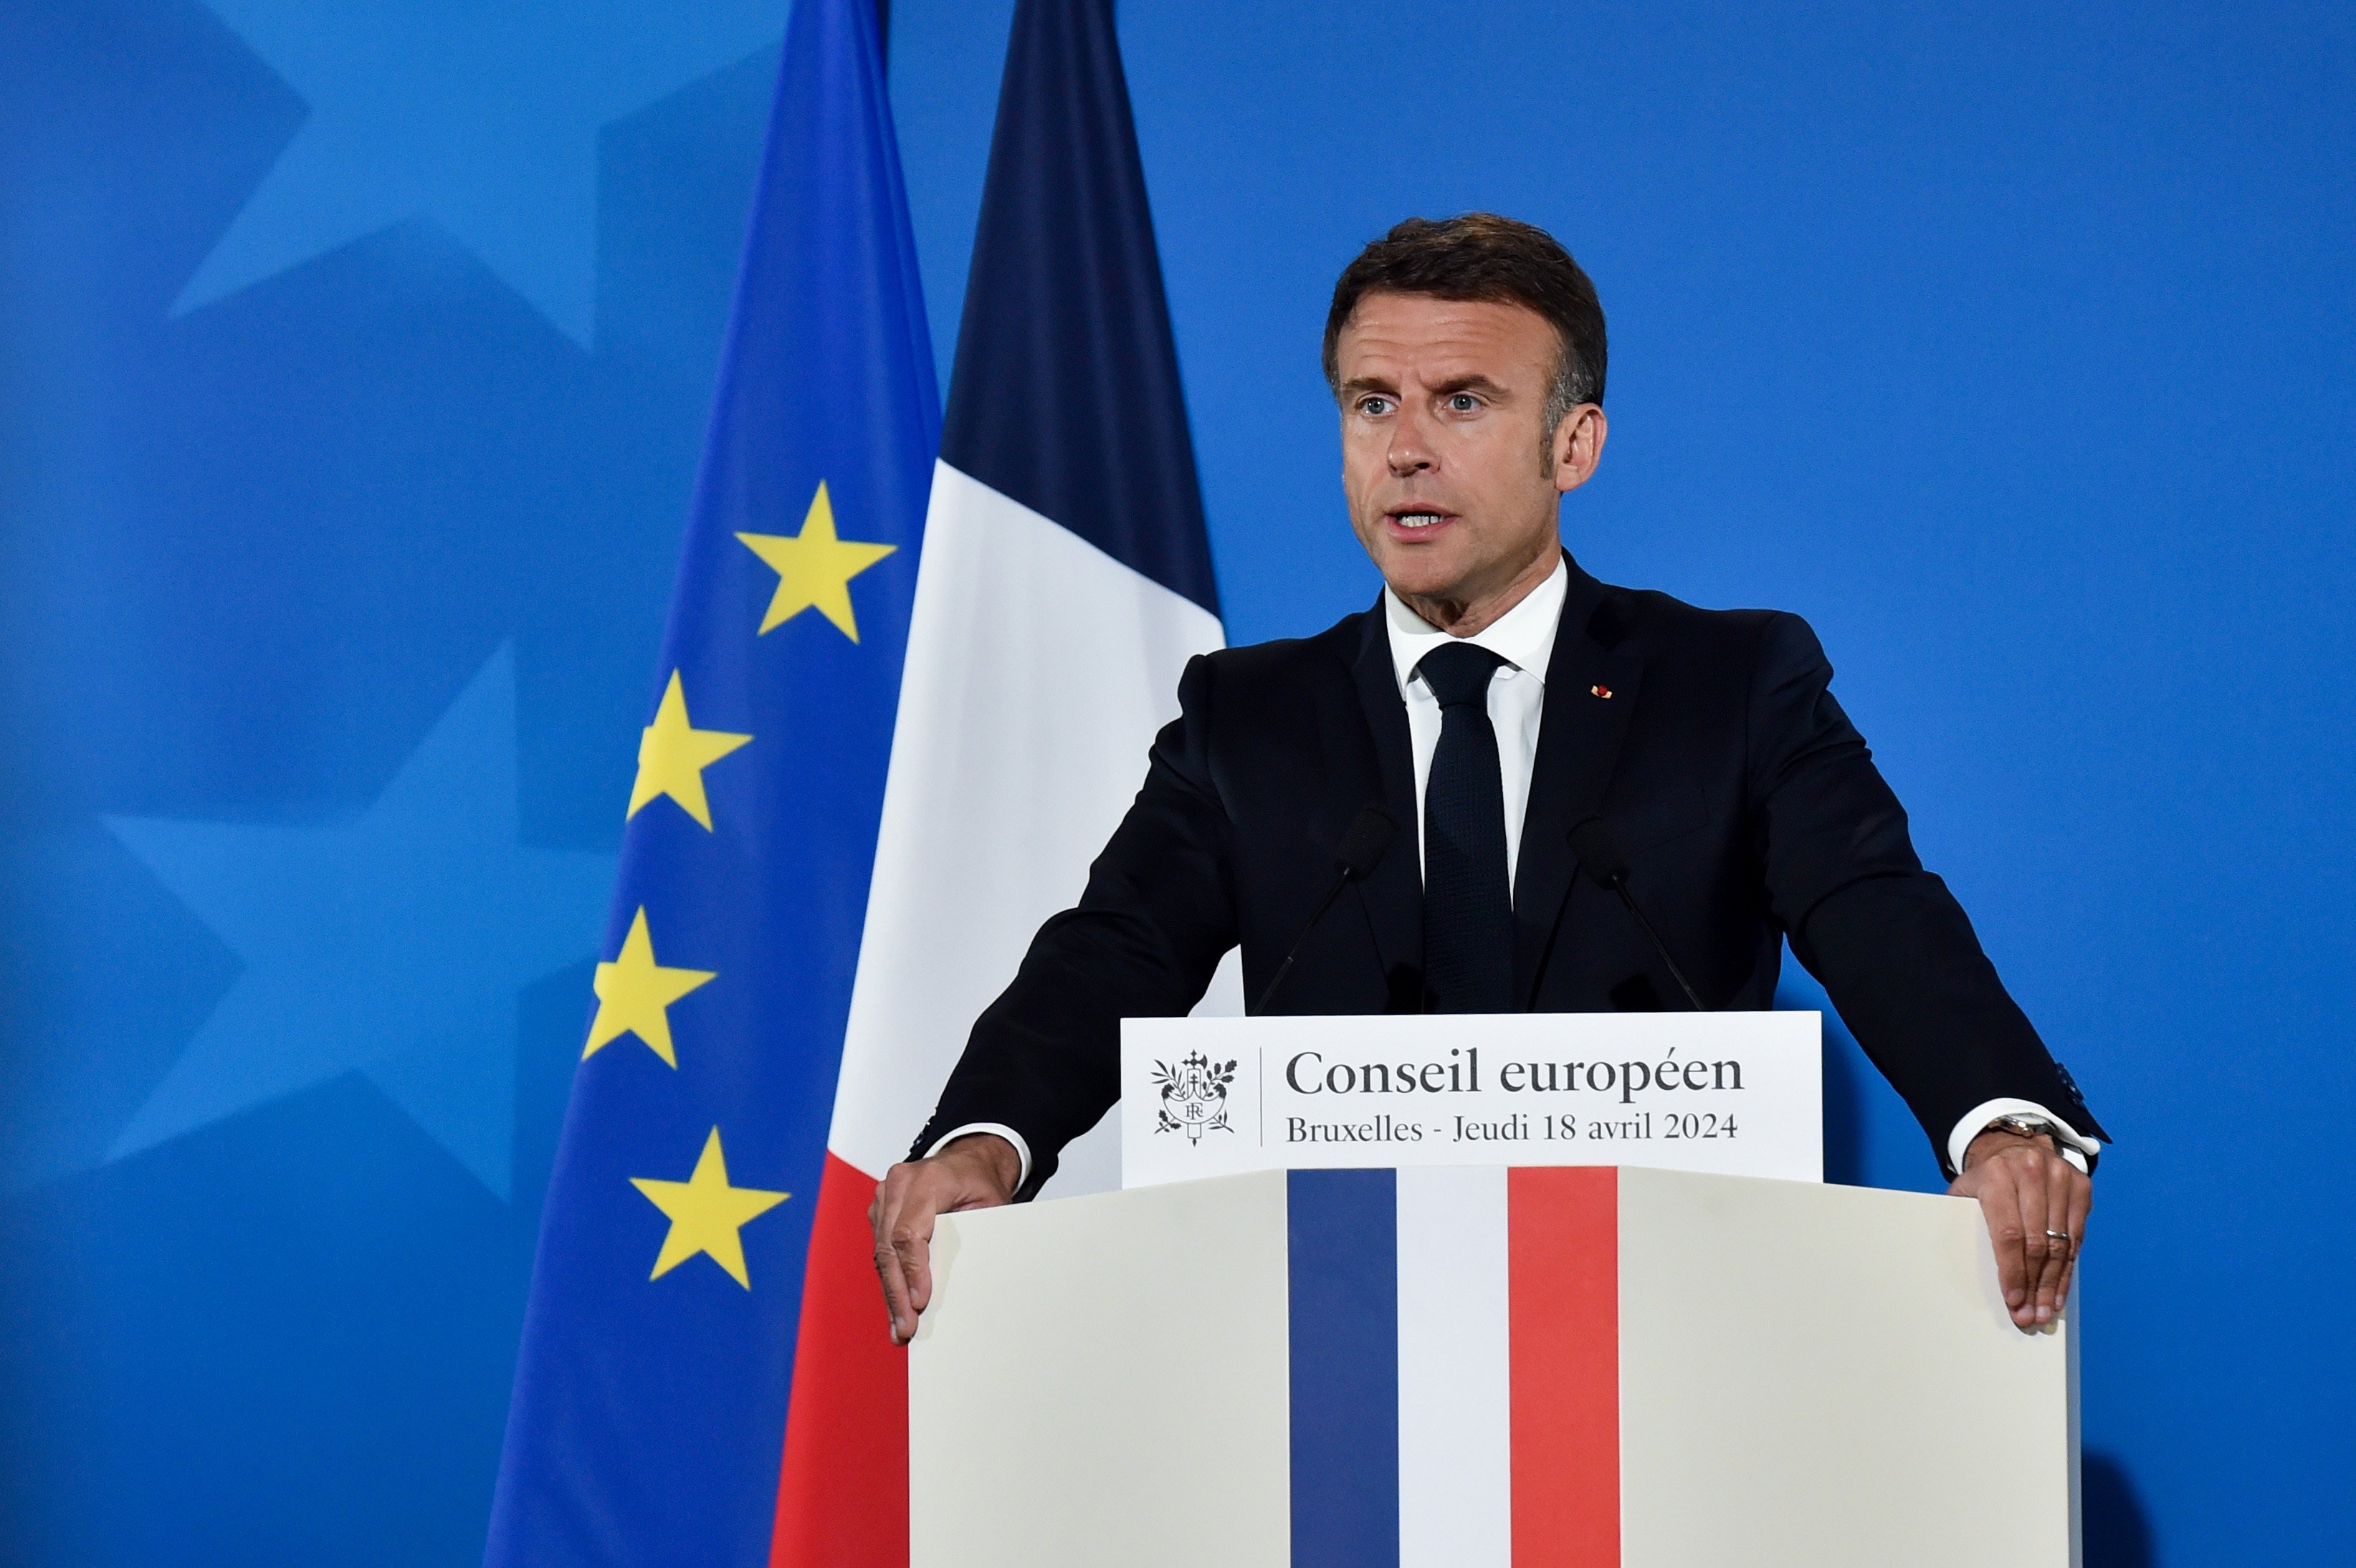 French President Emmanuel Macron speaking at a press conference in Brussels earlier this month. Photo: European Council/dpa